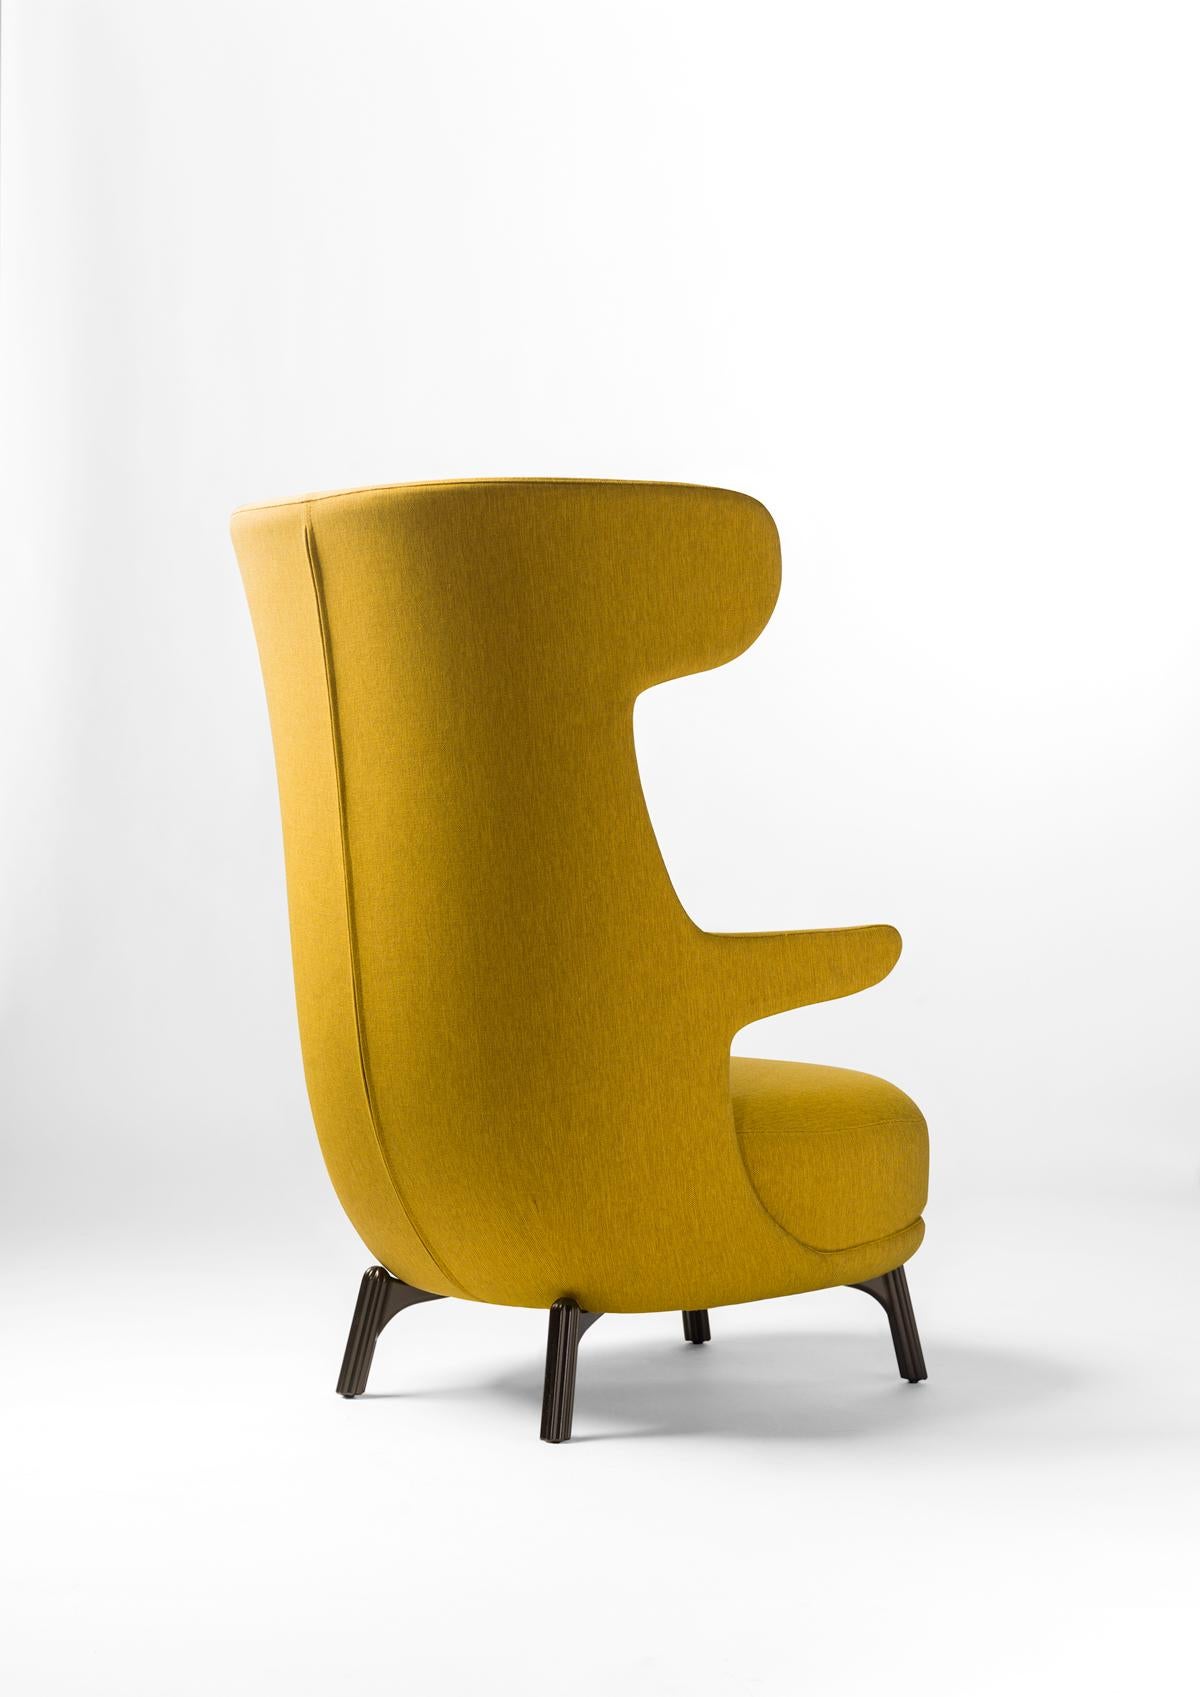 Contemporary Mustard Dino armchair upholstered in fabric by Jaime Hayon